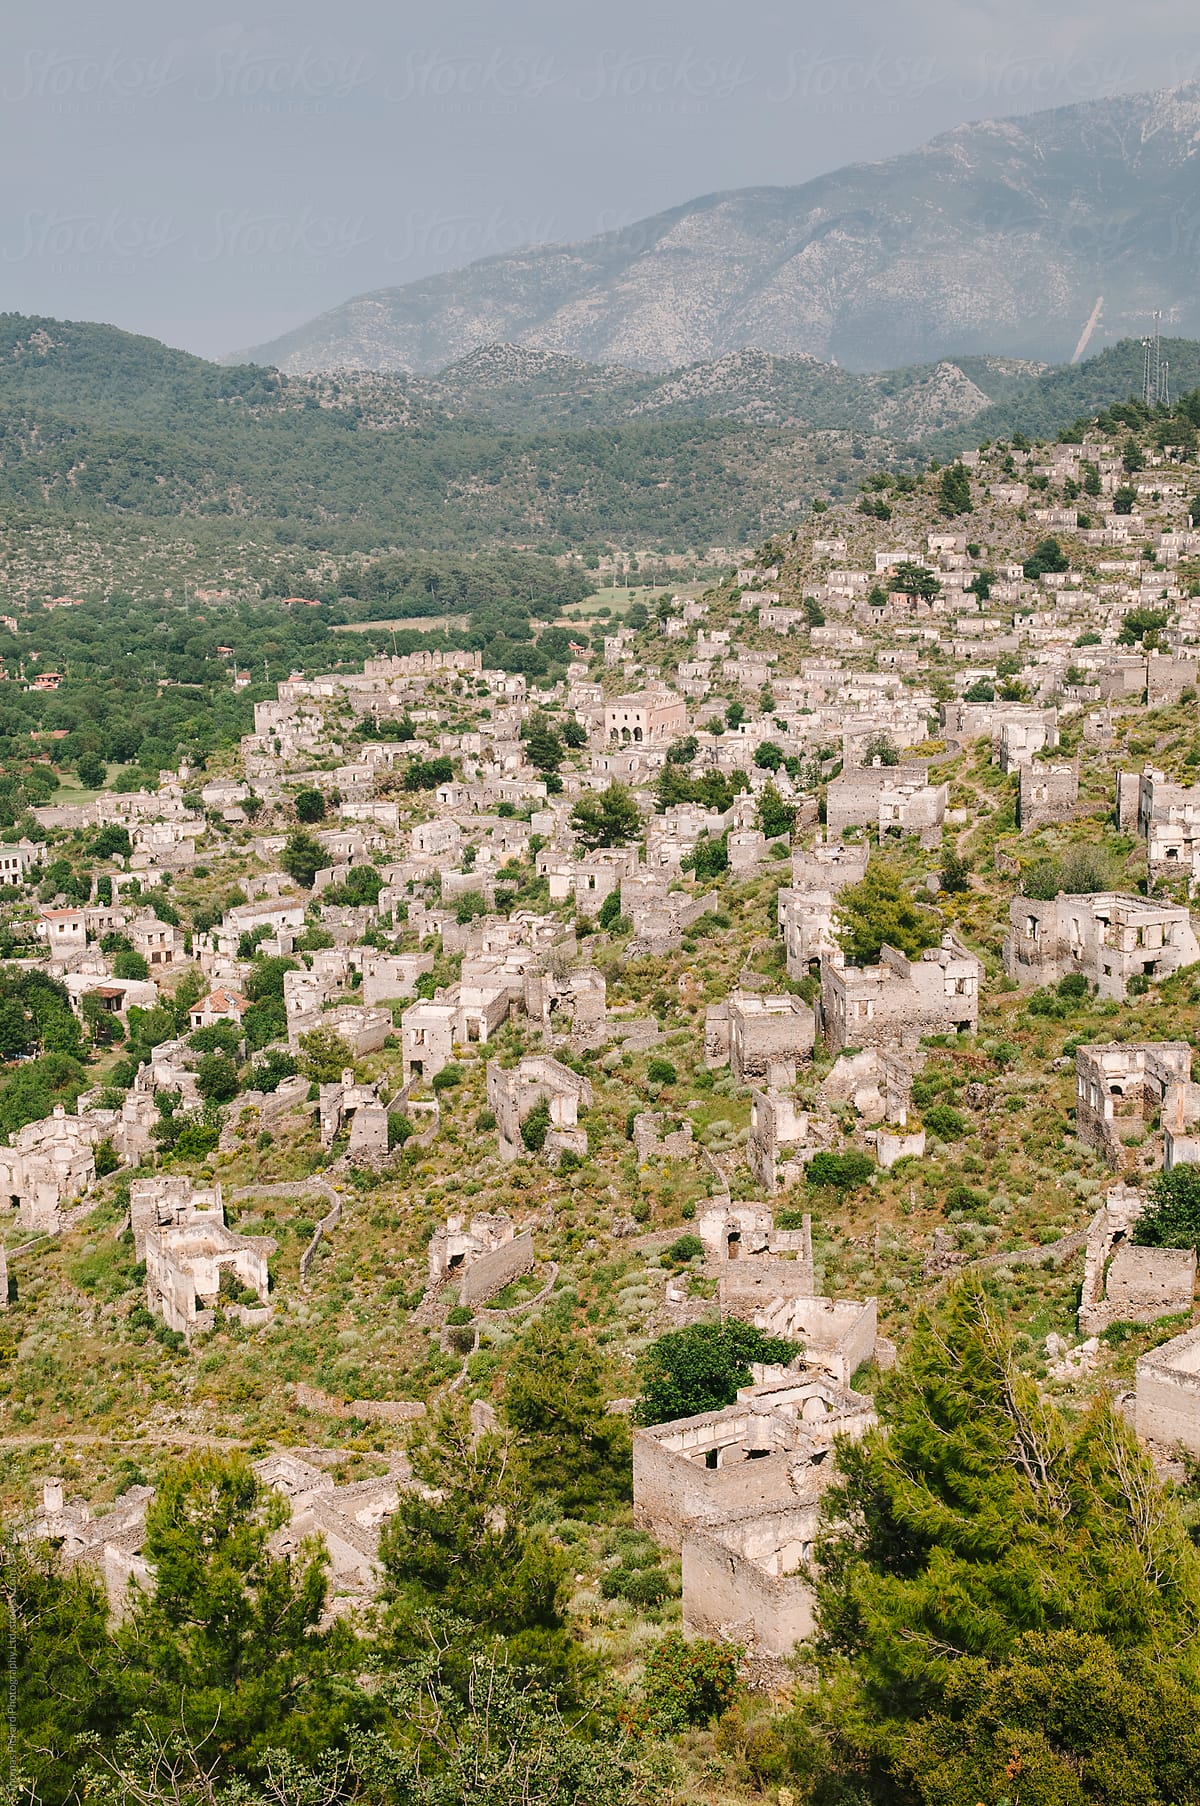 The abandoned town of Kayakoy, Turkey.